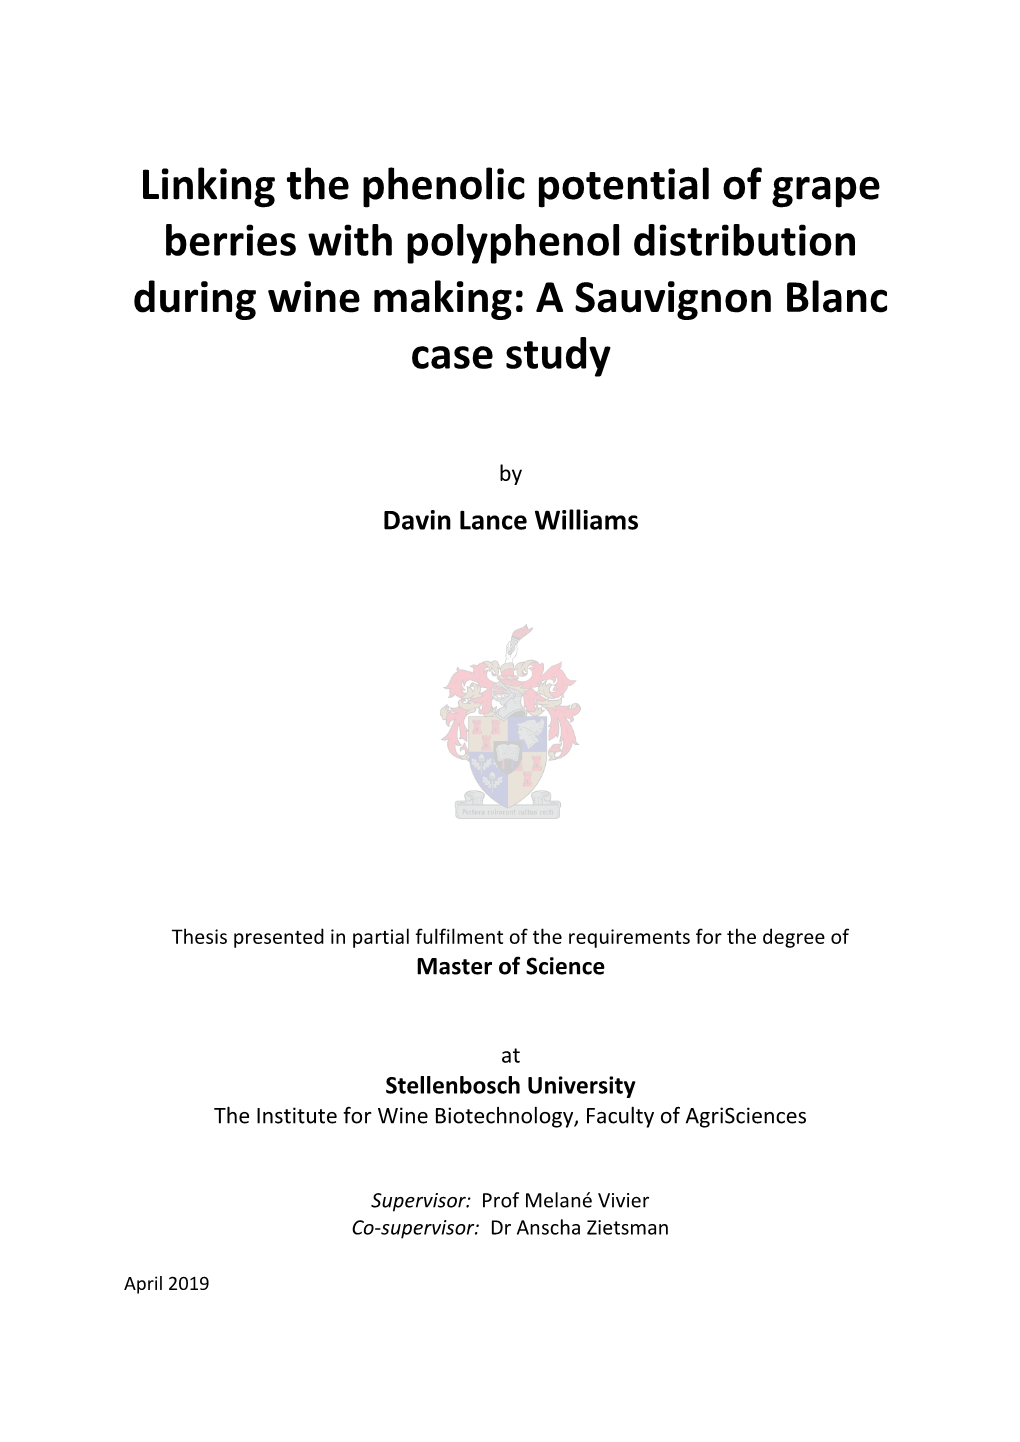 Linking the Phenolic Potential of Grape Berries with Polyphenol Distribution During Wine Making: a Sauvignon Blanc Case Study